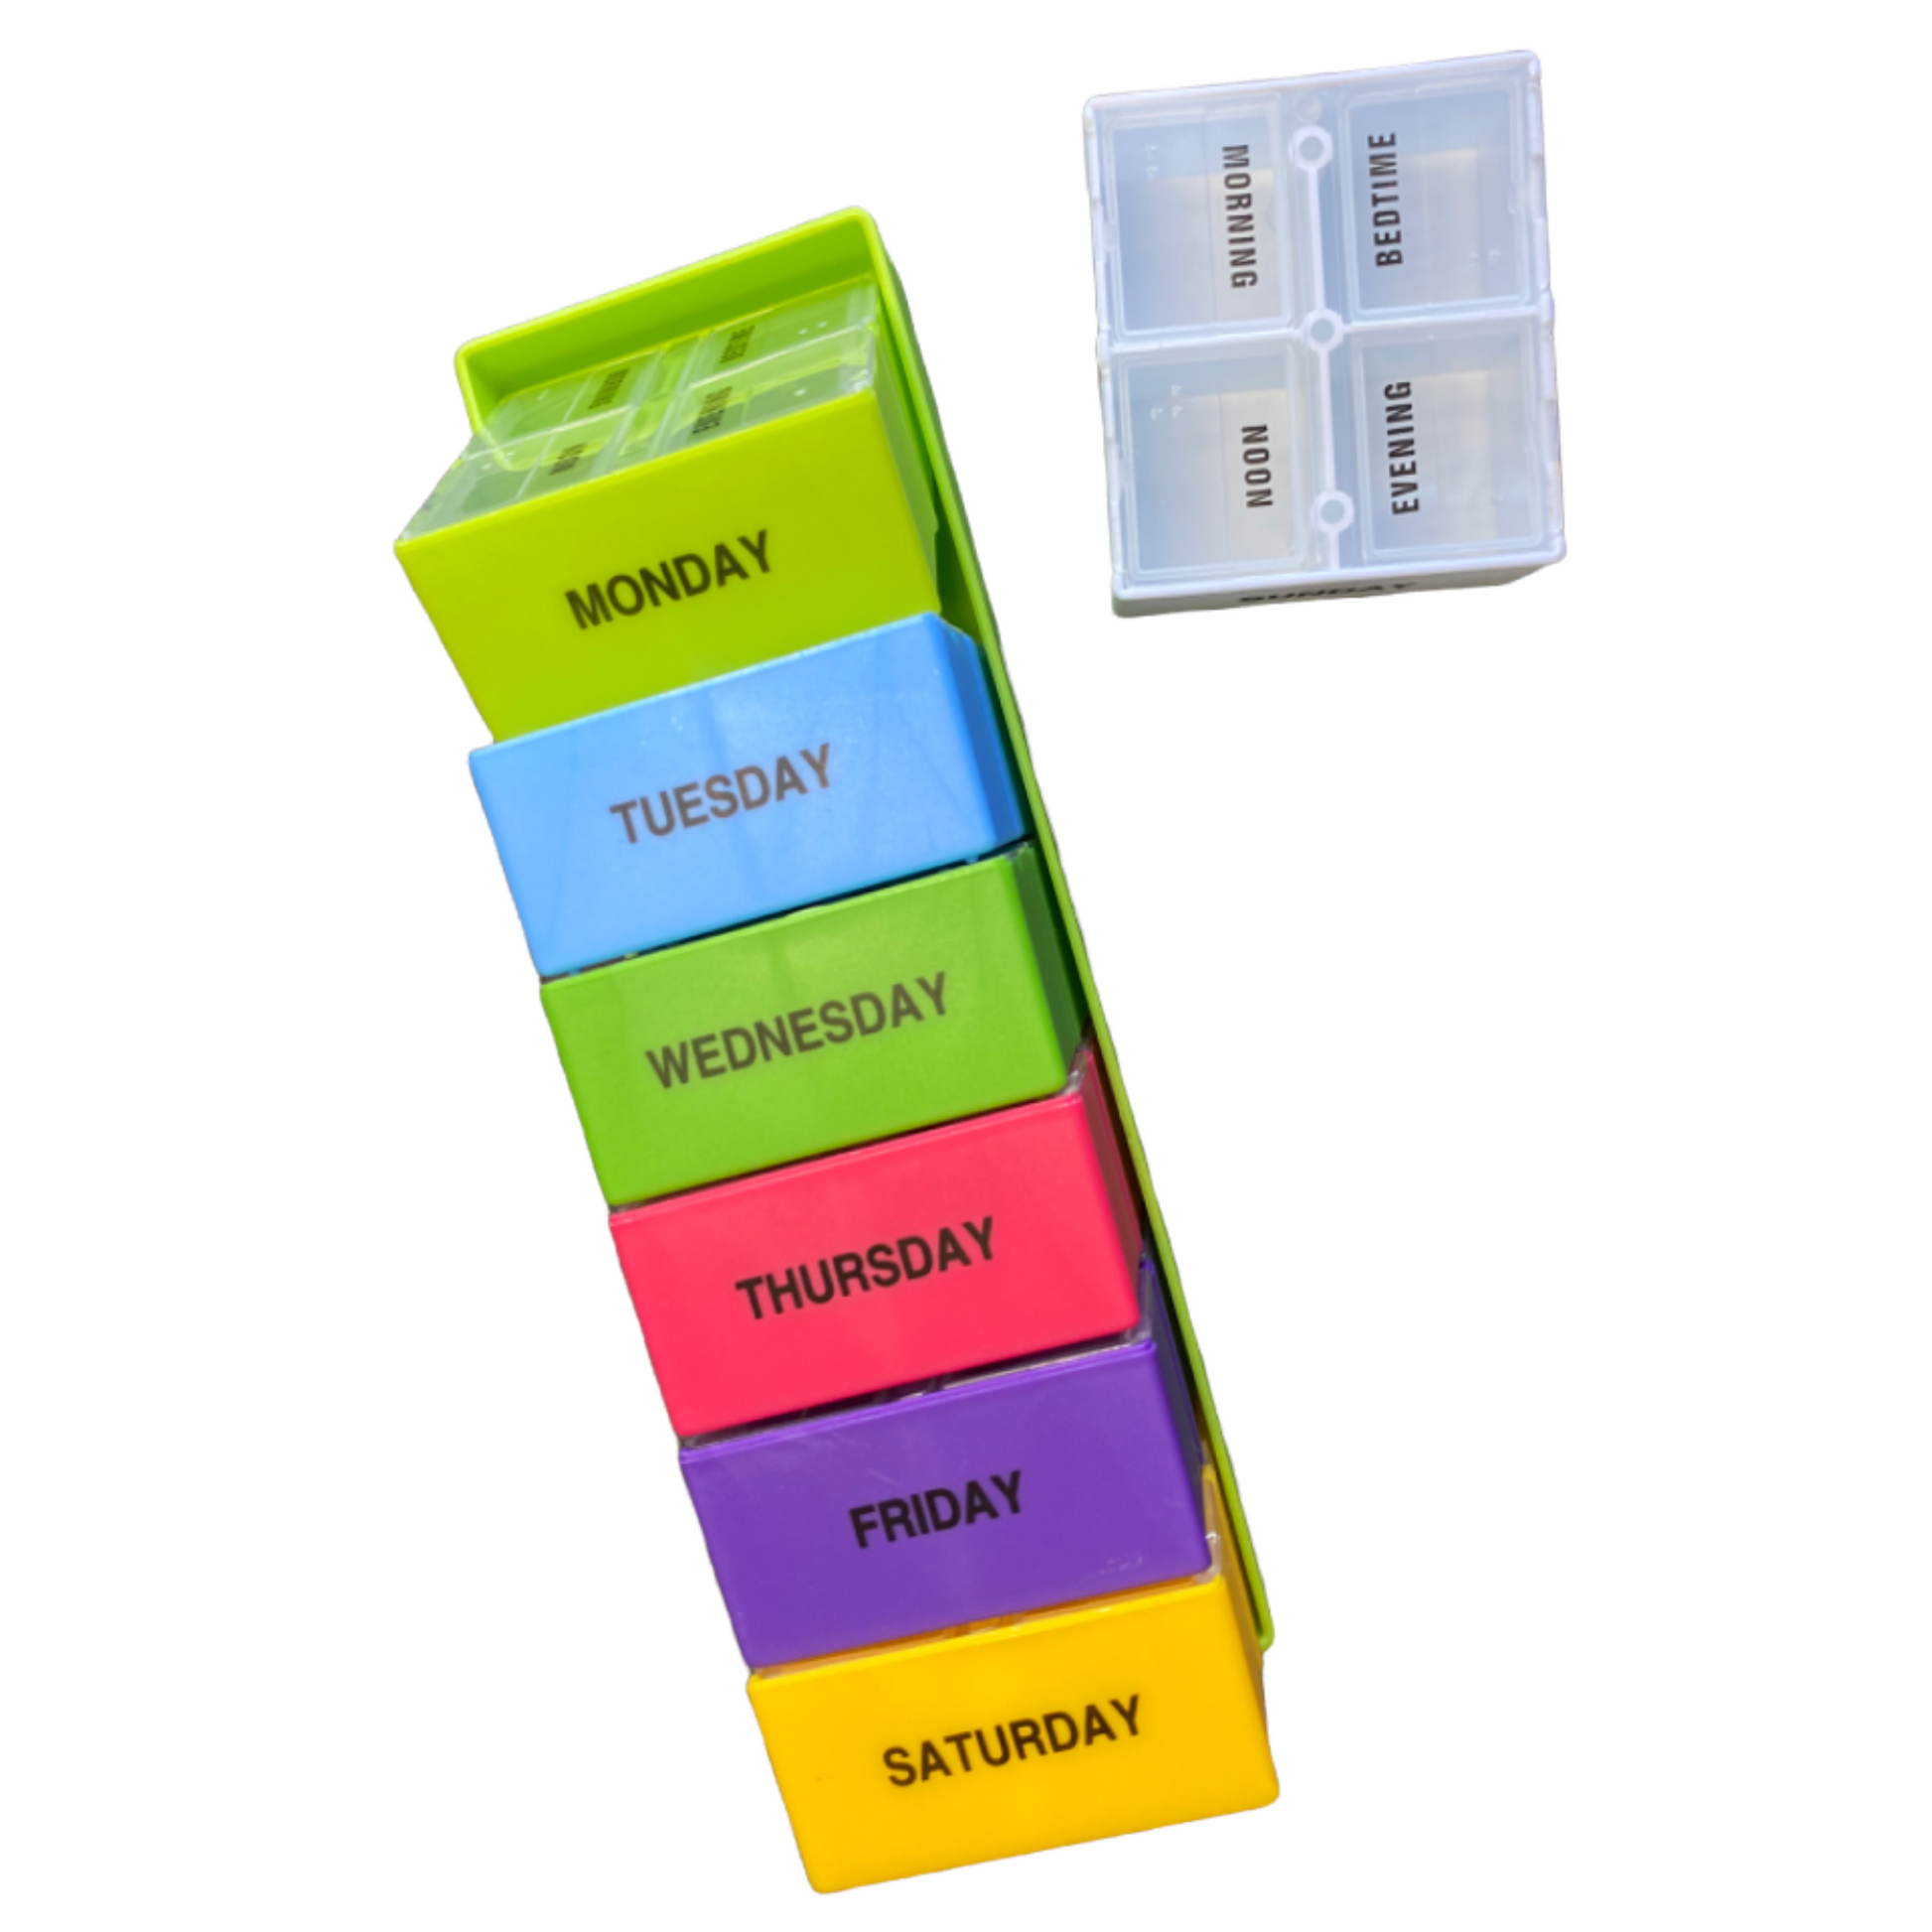 7 Day Pill Box — 4 Doses Daily Square Case Managing Medications SPIRIT SPARKPLUGS   